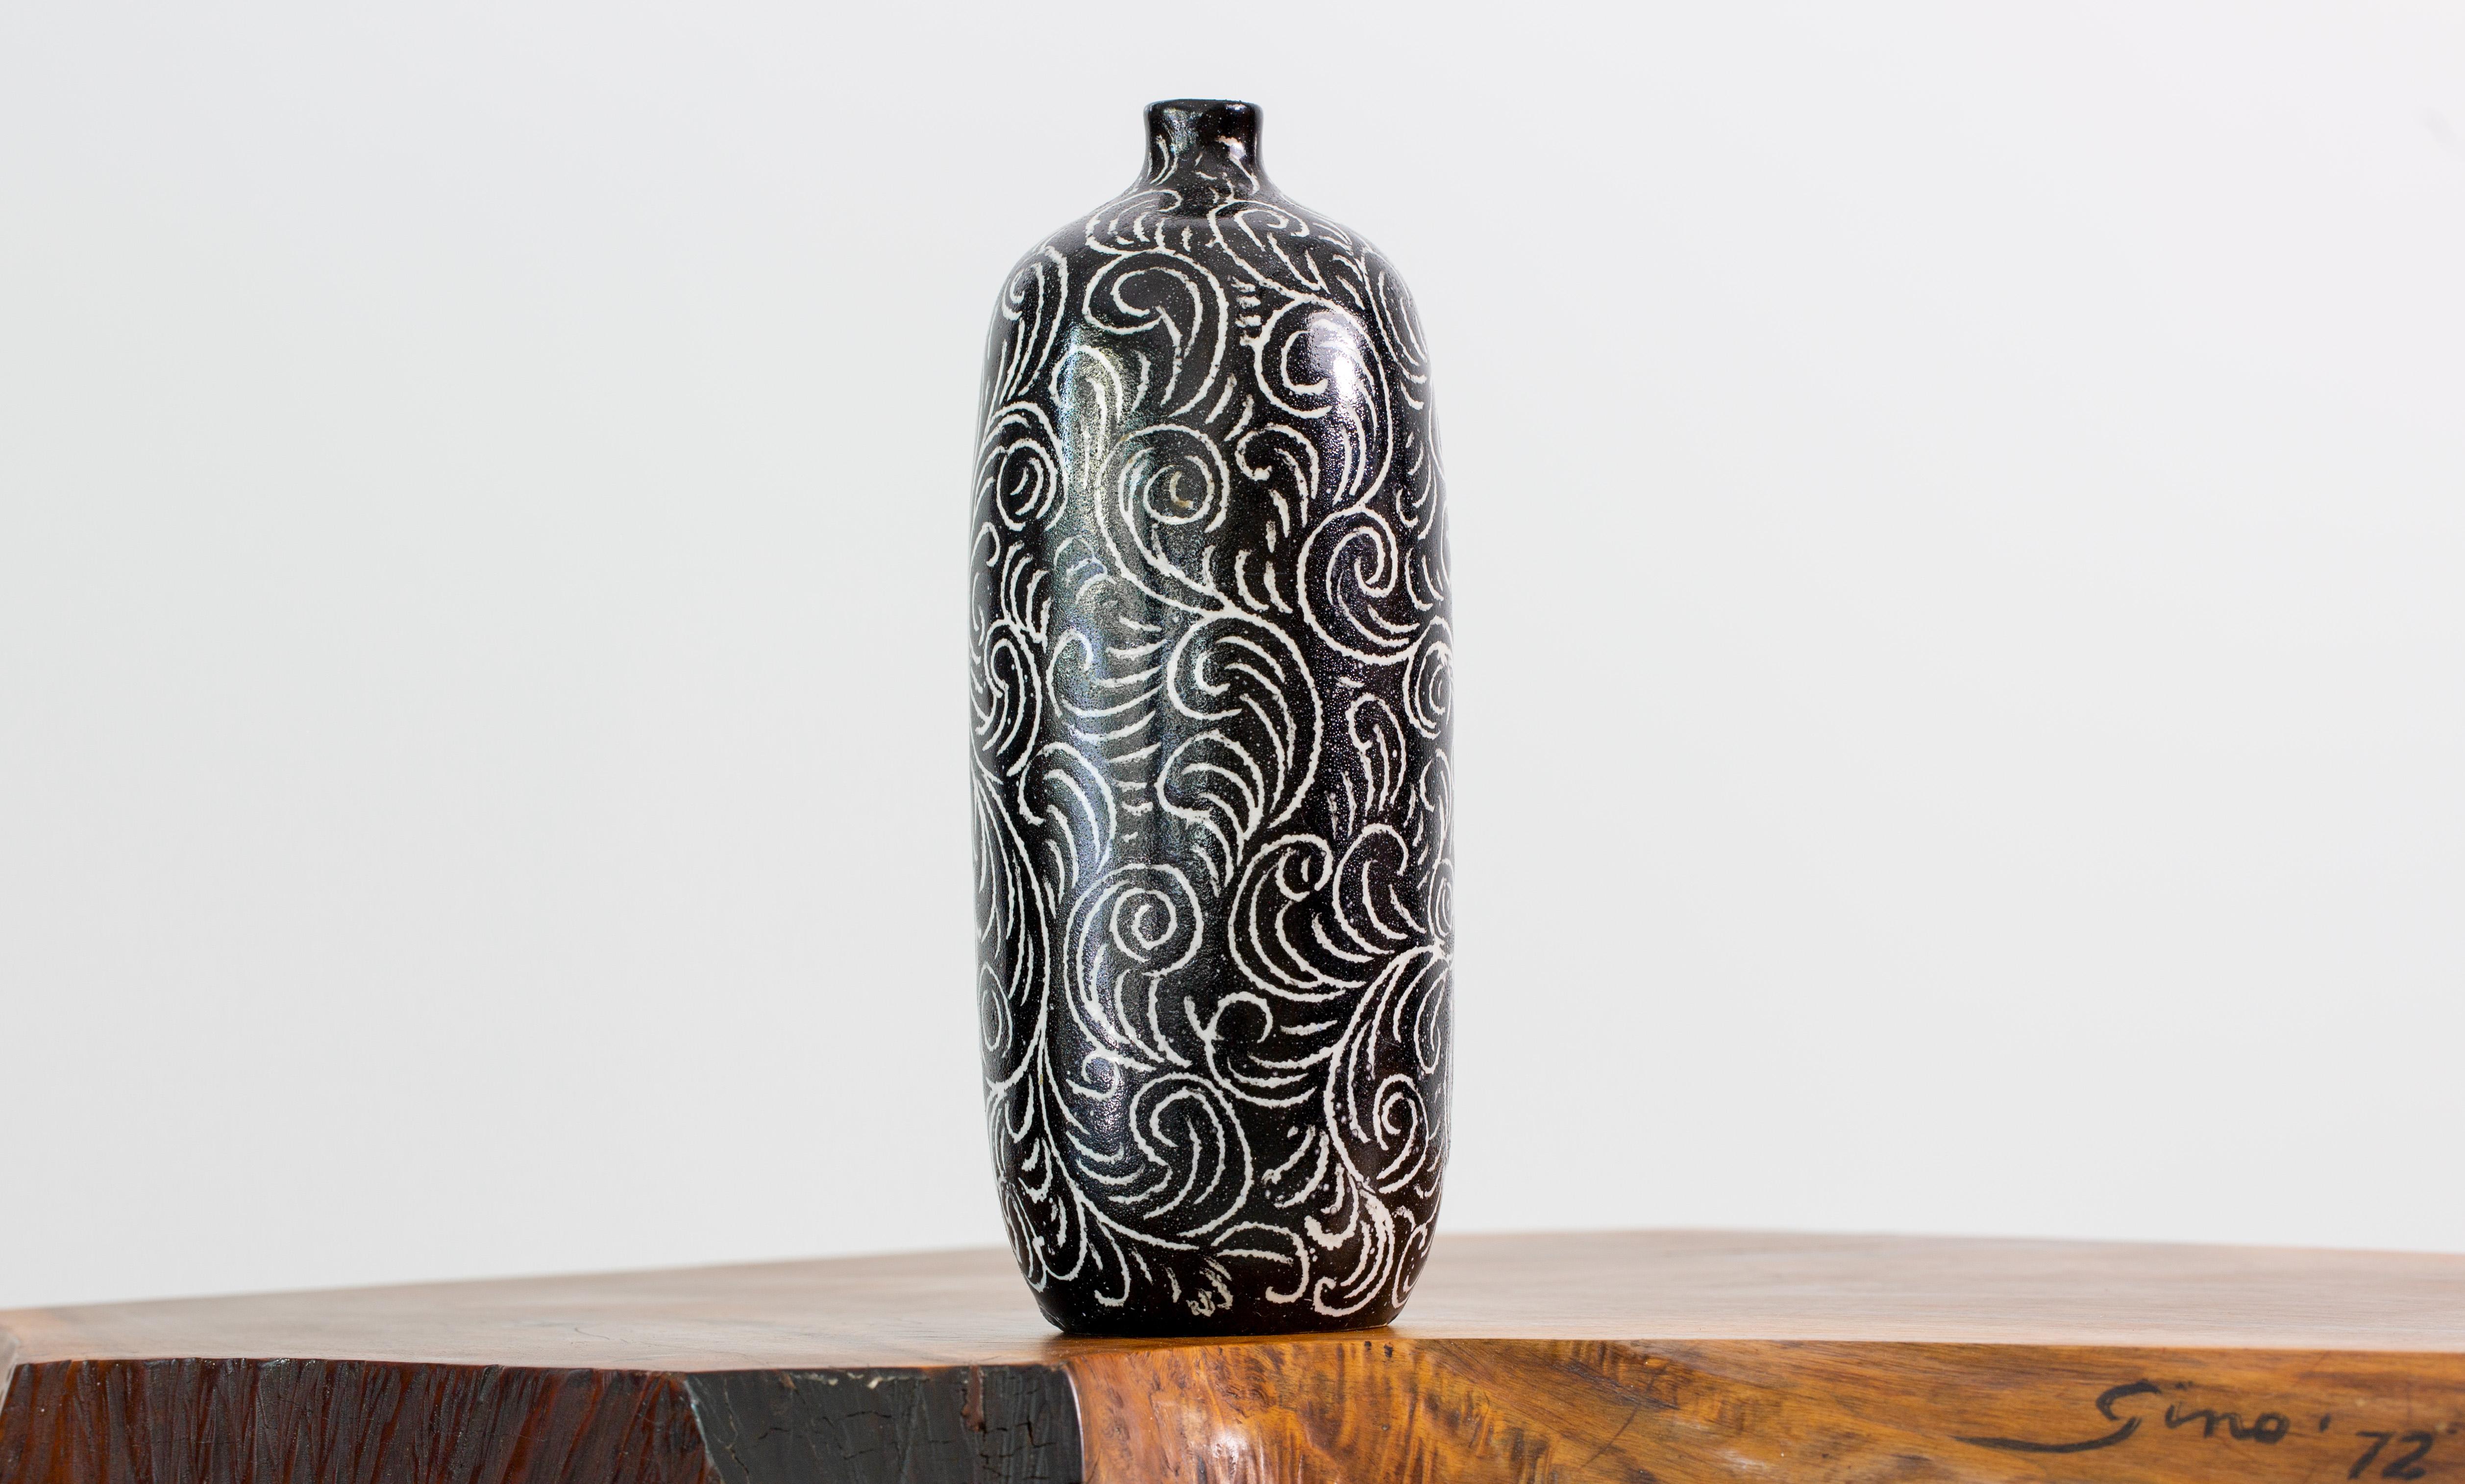 A perfectly sized Italian pottery vase produced by Raymor and attributed to Aldo Londi. A beautiful dark glaze accented with organic sgraffito swirls. Signed on the bottom. 

Dimensions:
4.5